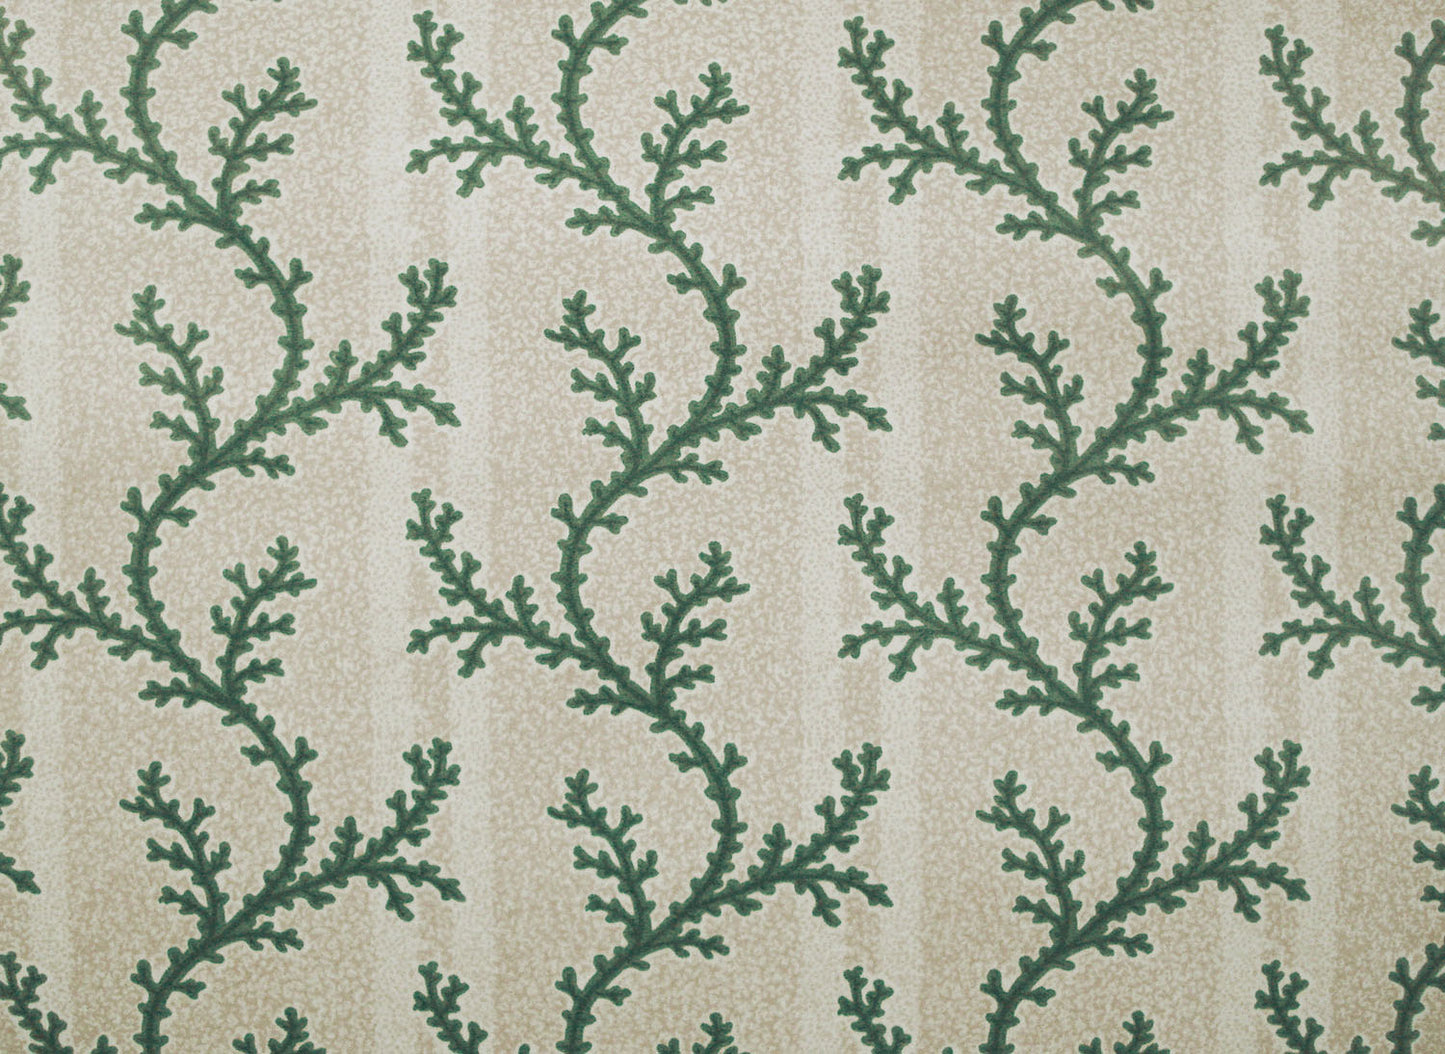 cotton fabric printed with a thin branching green coral